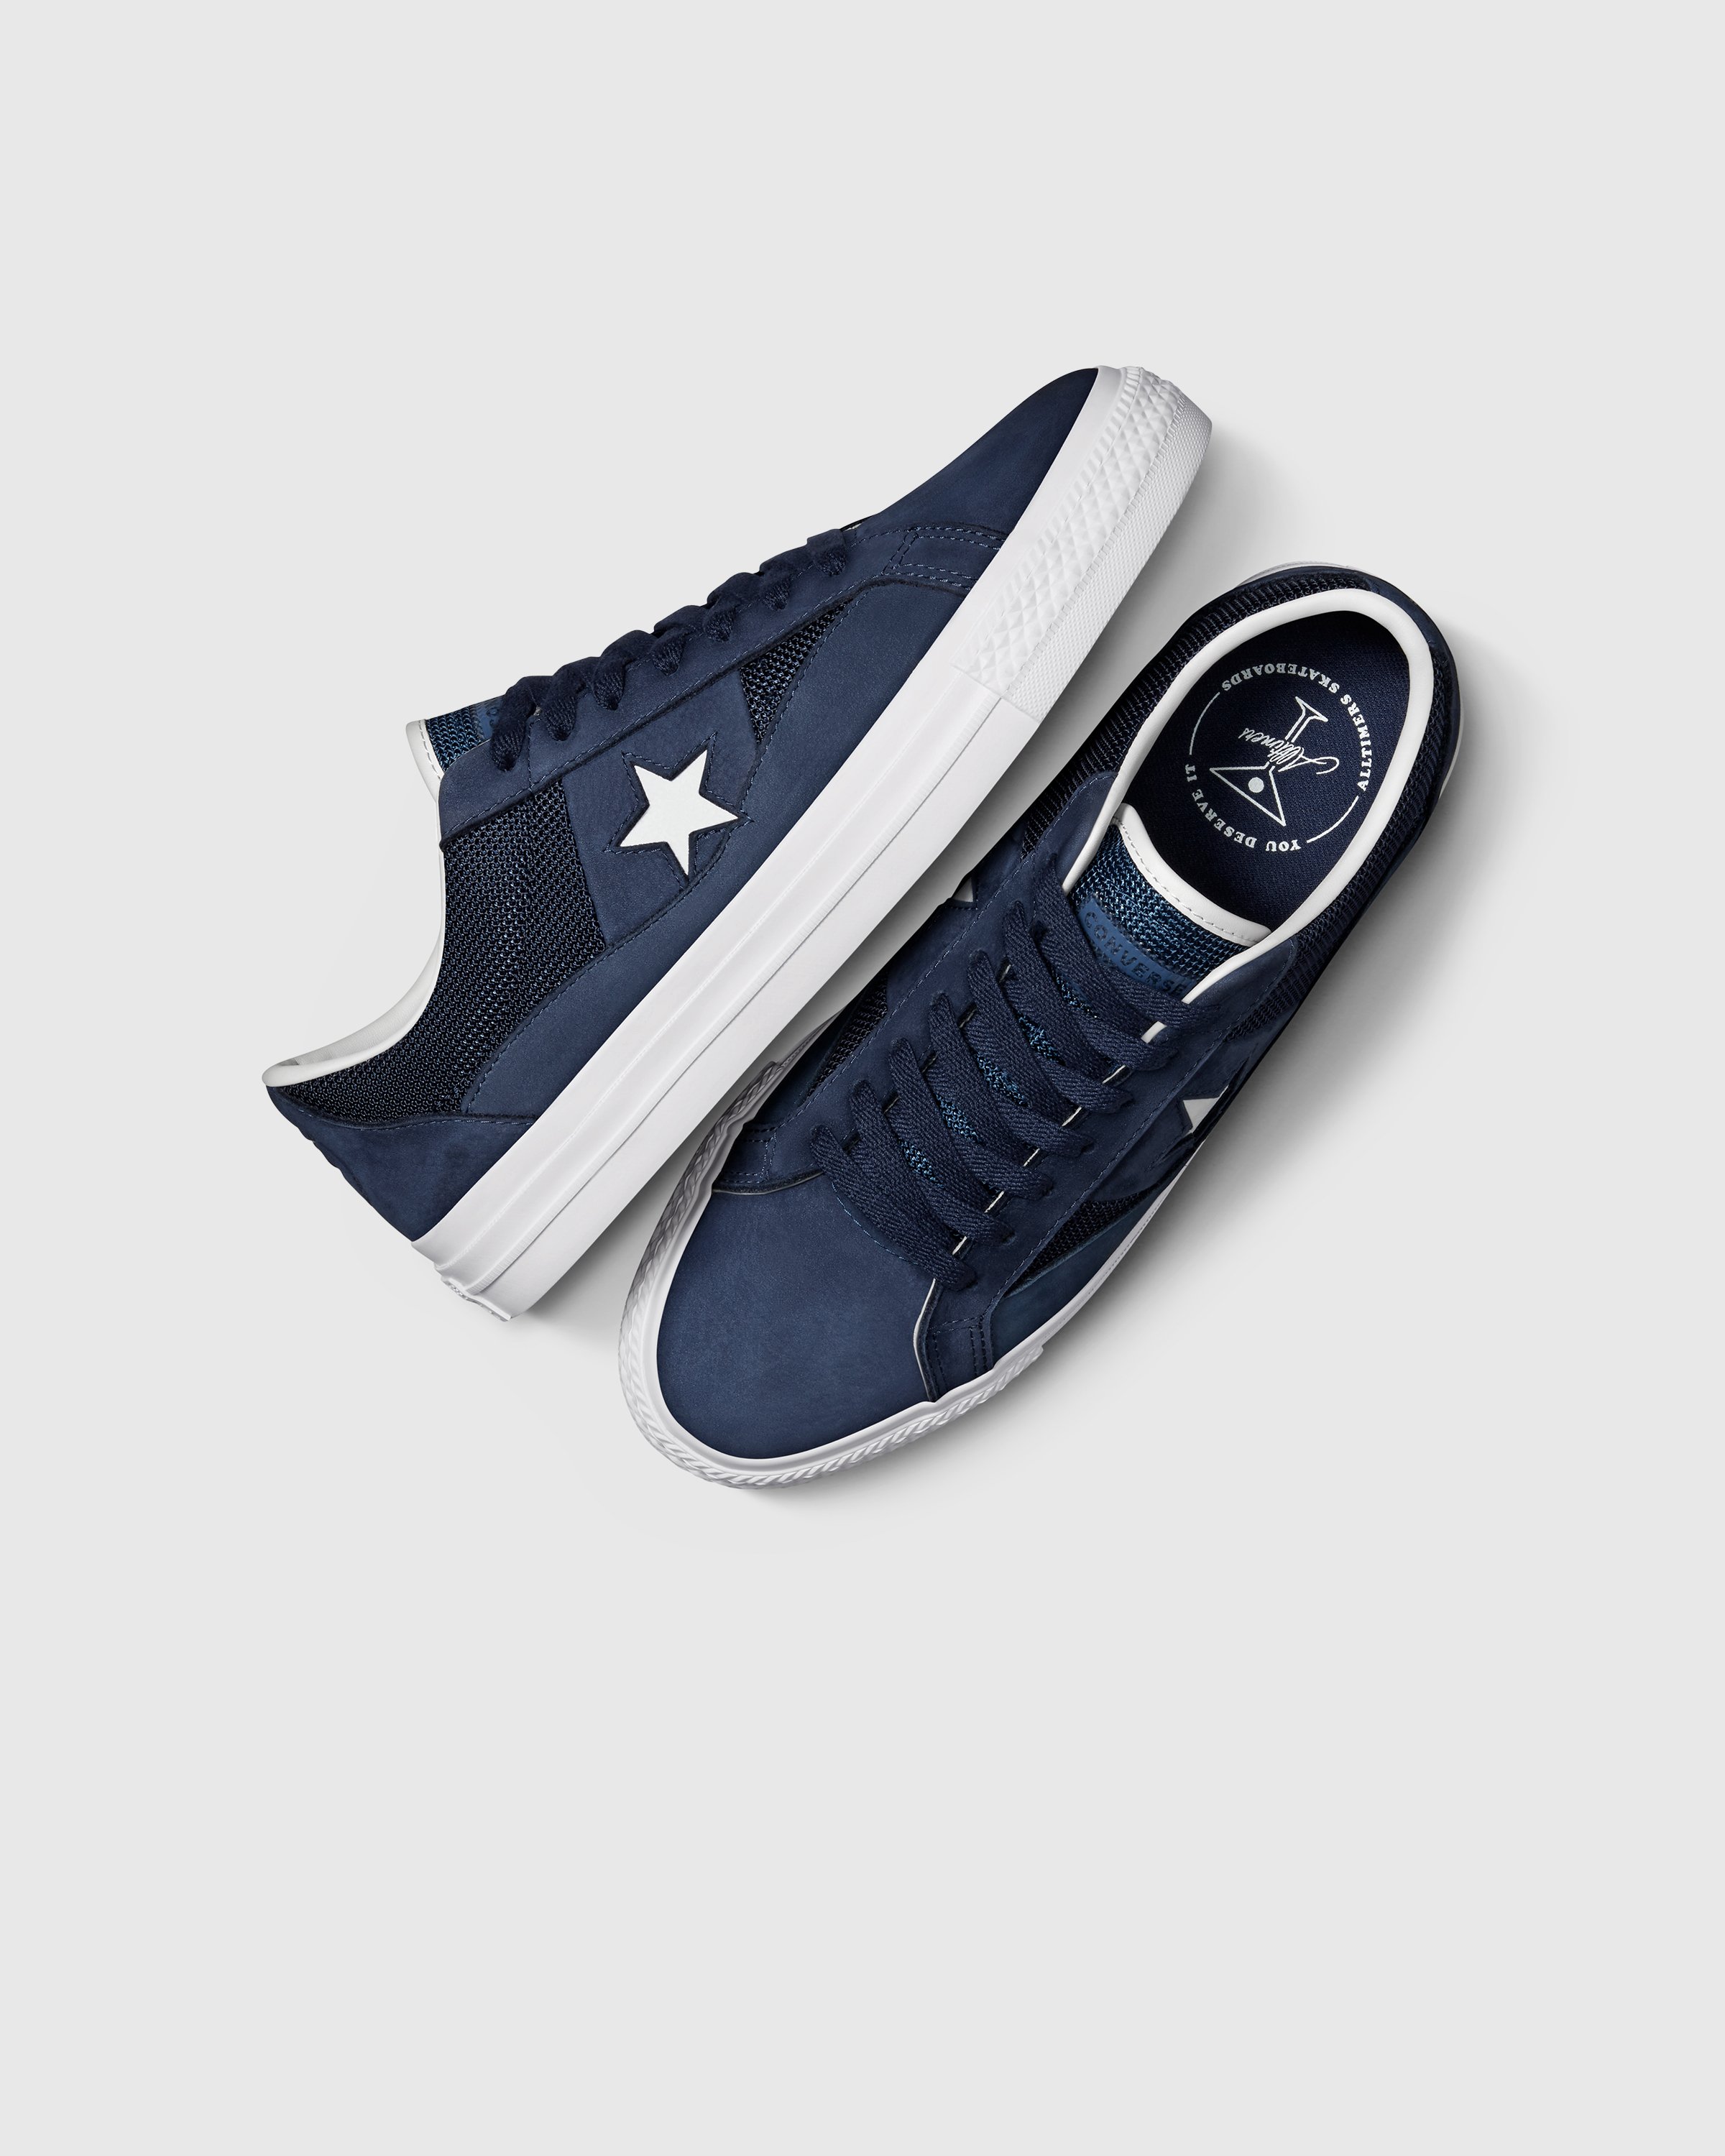 Converse - CONS x Alltimers ONE STAR PRO OX Midnight Navy/Navy - Footwear - Blue - Image 4